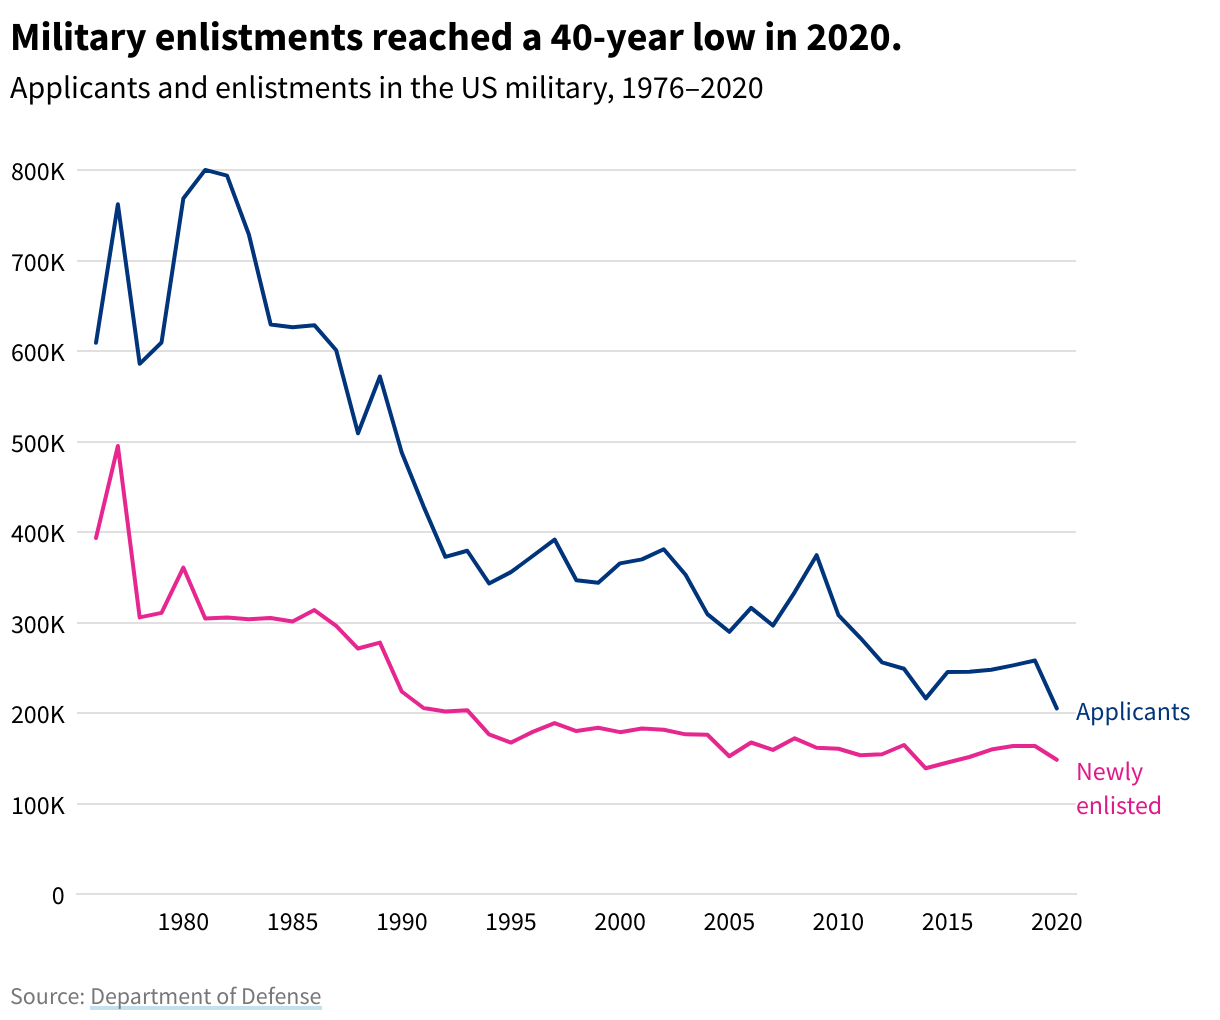 Is US military enlistment down?